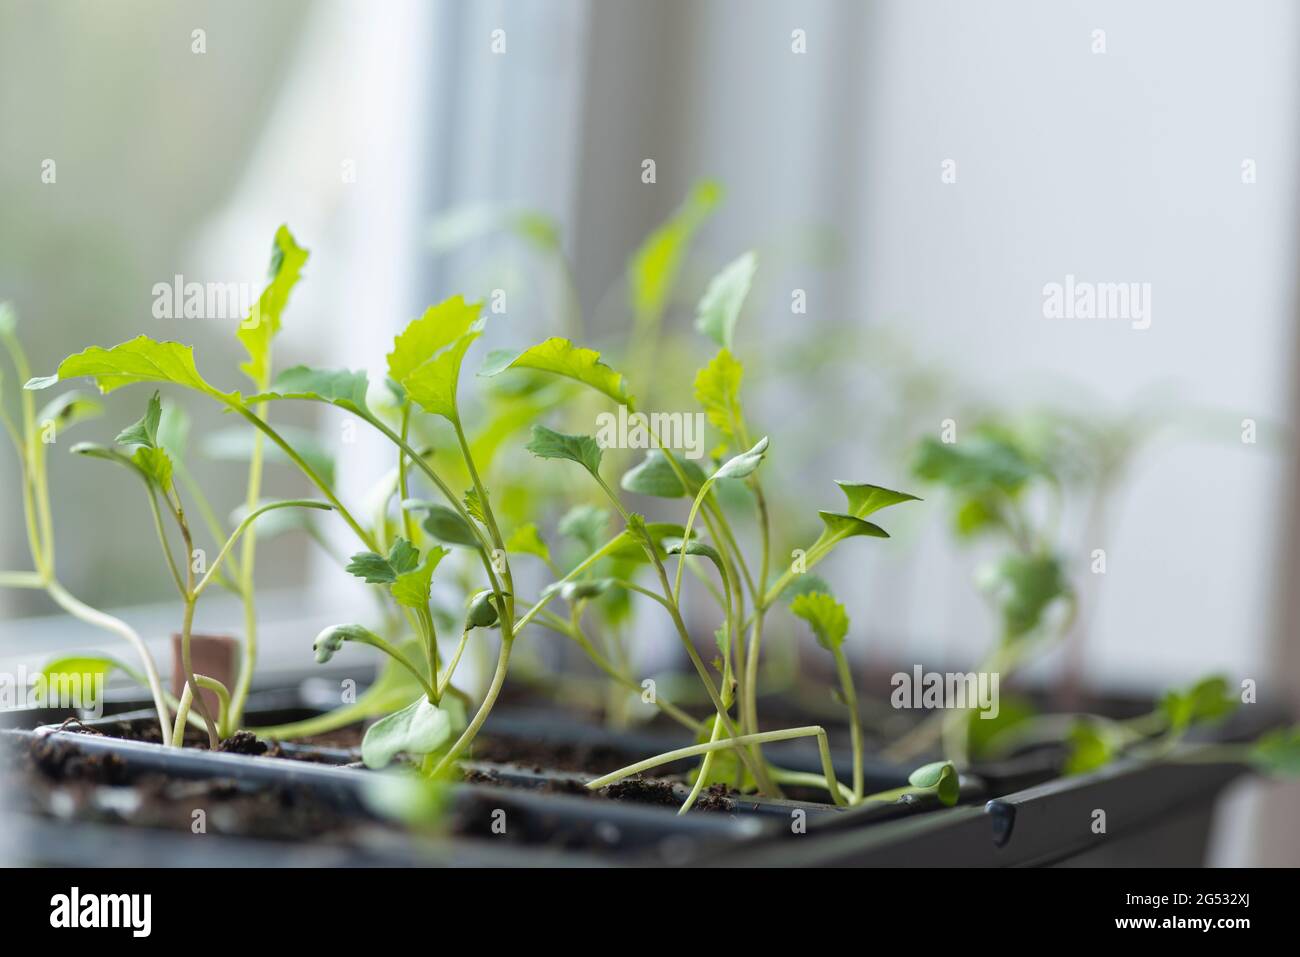 Germinated  broccoli seedlings on a window sill- close-up Stock Photo